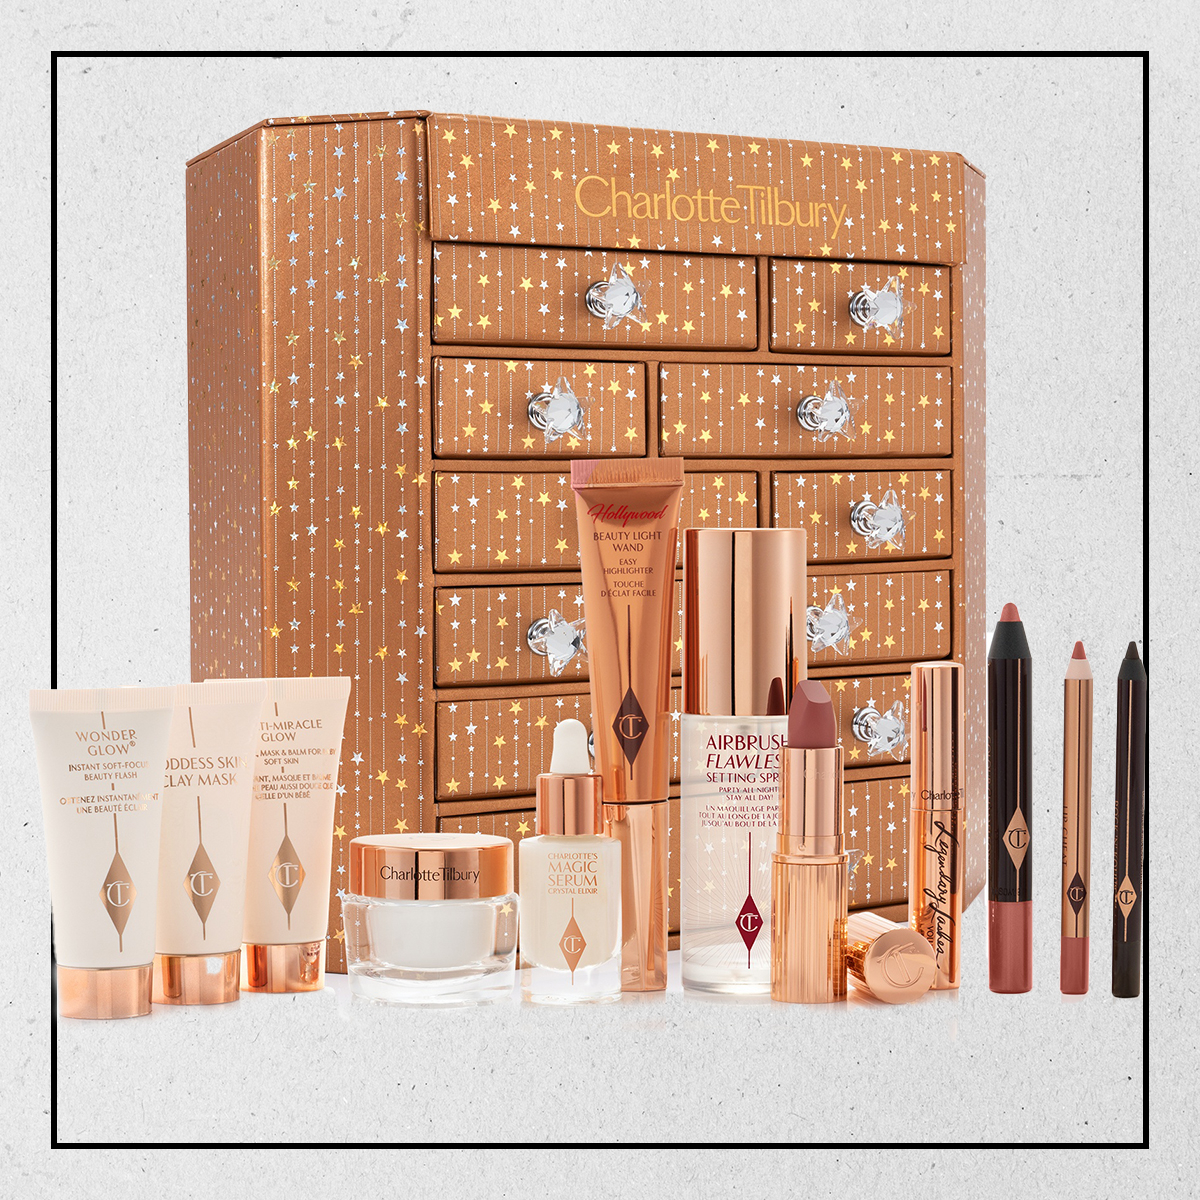 The Best Beauty Advent Calendar-Inspired Holiday Gift Ideas